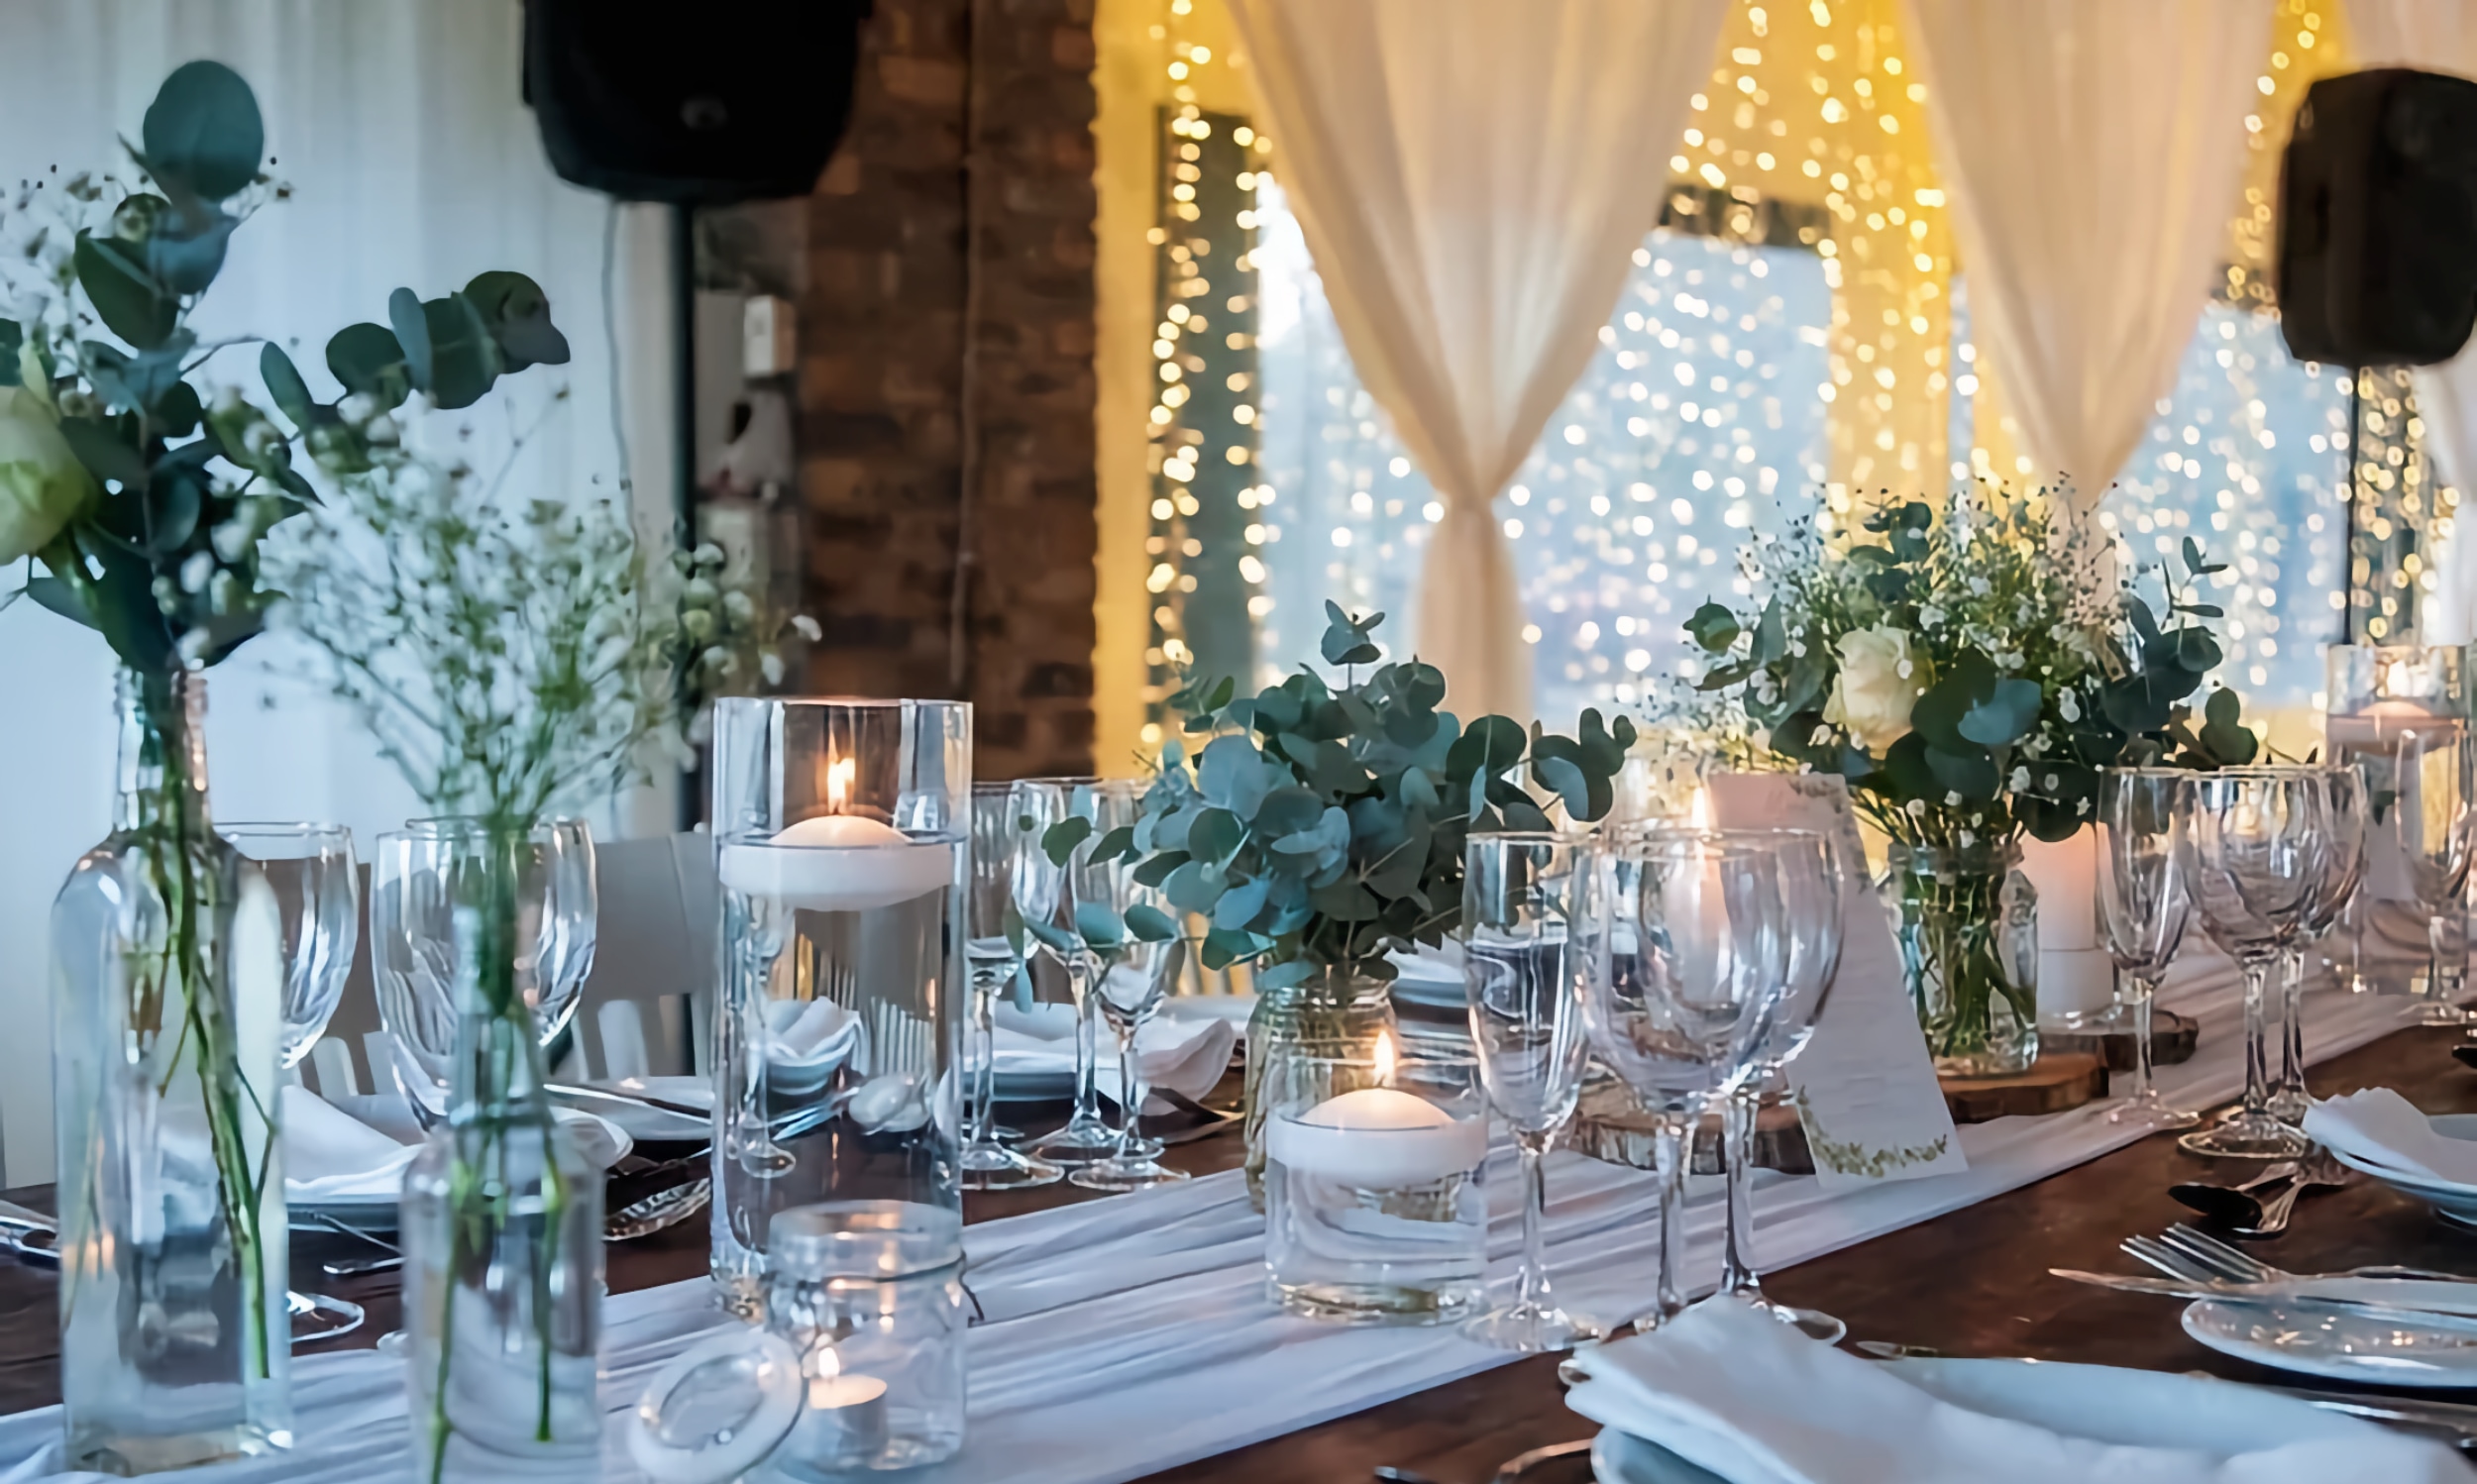 A long table set for an event, with crystal and glass, sparkle and greenery atop a dark wood table with white runners